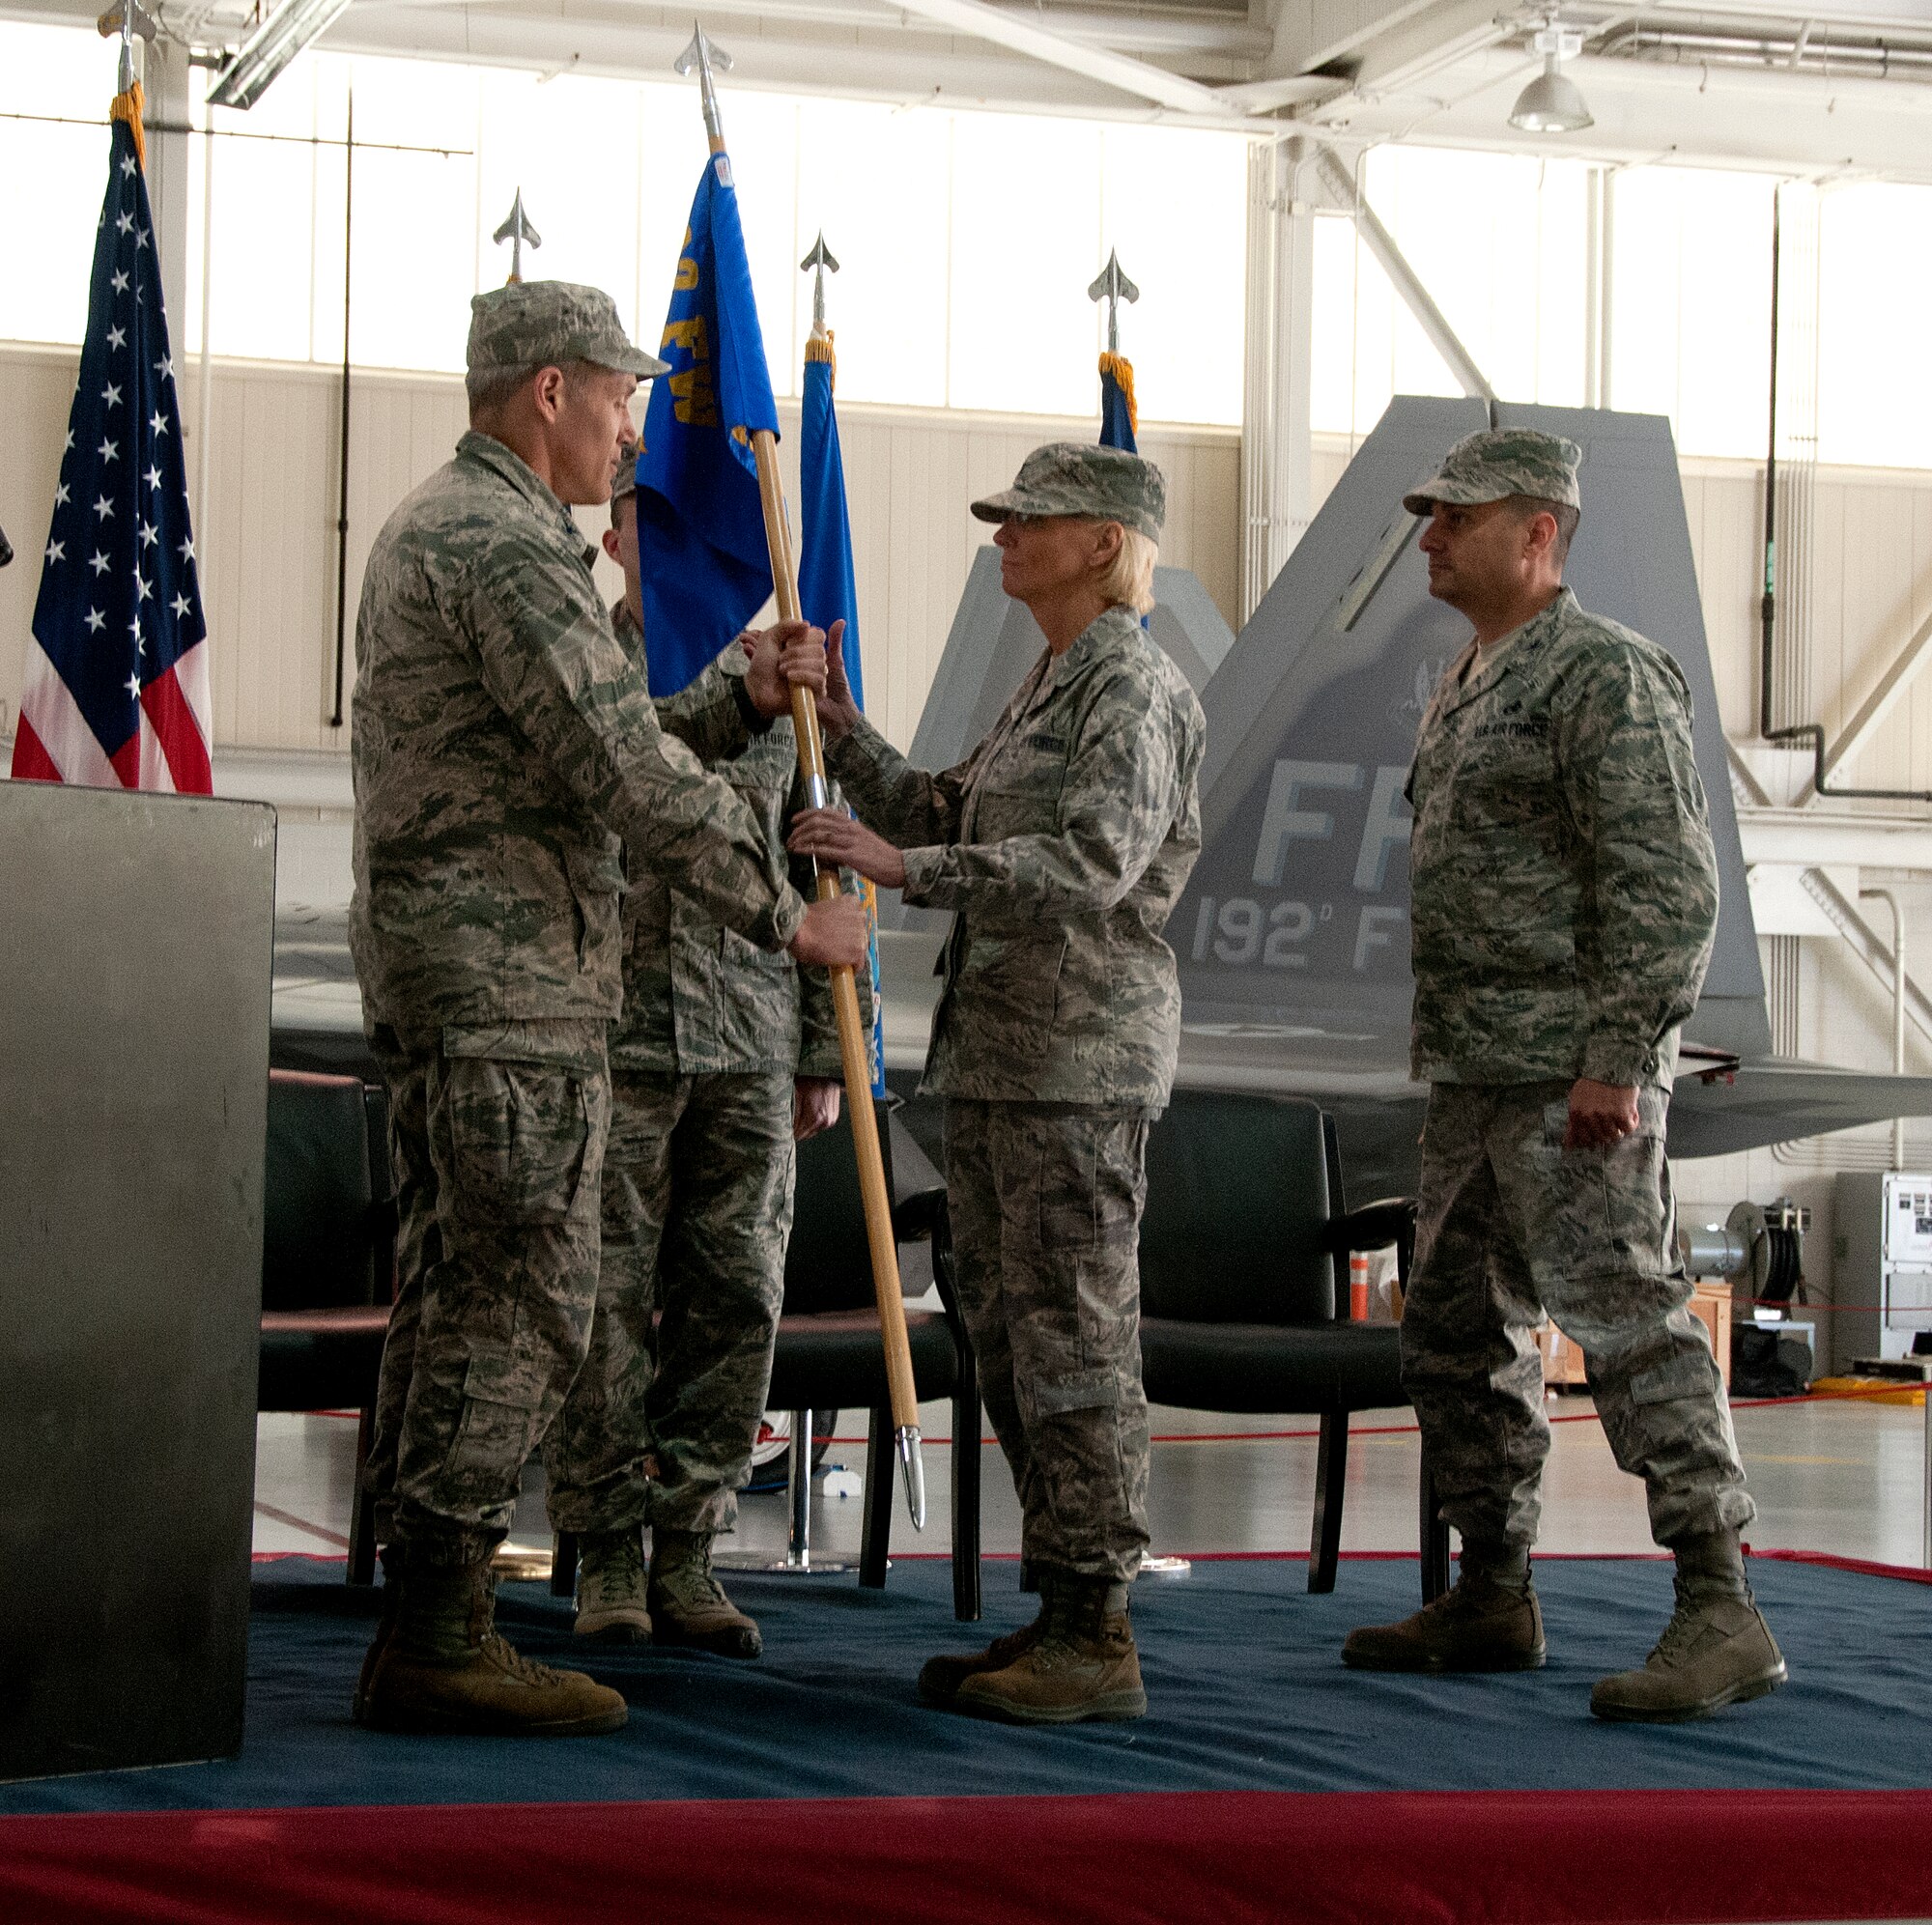 The 192nd Mission Support Group celebrated a change of command ceremony October 18, 2015, at Joint Base Langley-Eustis, Virginia. Col. Toni M. Lord assumed command of the Mission Support Group from Col. Jeffery L. Ryan. The 192nd MSG is comprised of four Squadrons with more than 340 personnel supporting an array of missions including security, personnel, communications, civil engineering, supply chain management, and logistics readiness. (U.S. Air National Guard photo by Master Sgt. Carlos J. Claudio)
